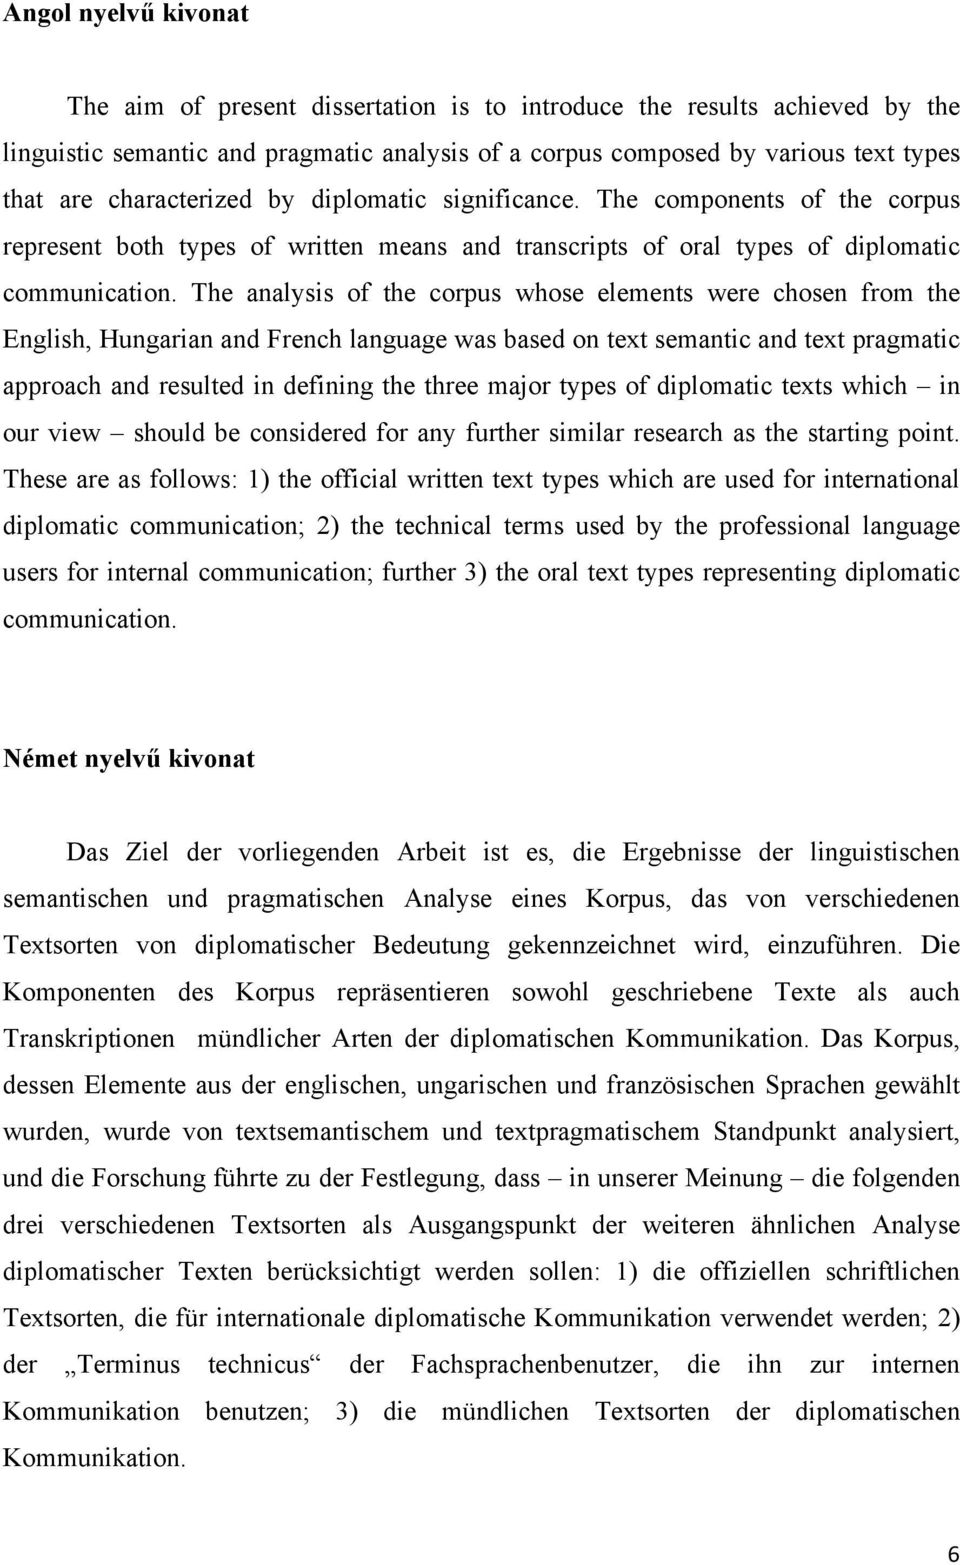 diplomatic significance. The components of the corpus represent both types of written means and transcripts of oral types of diplomatic communication.